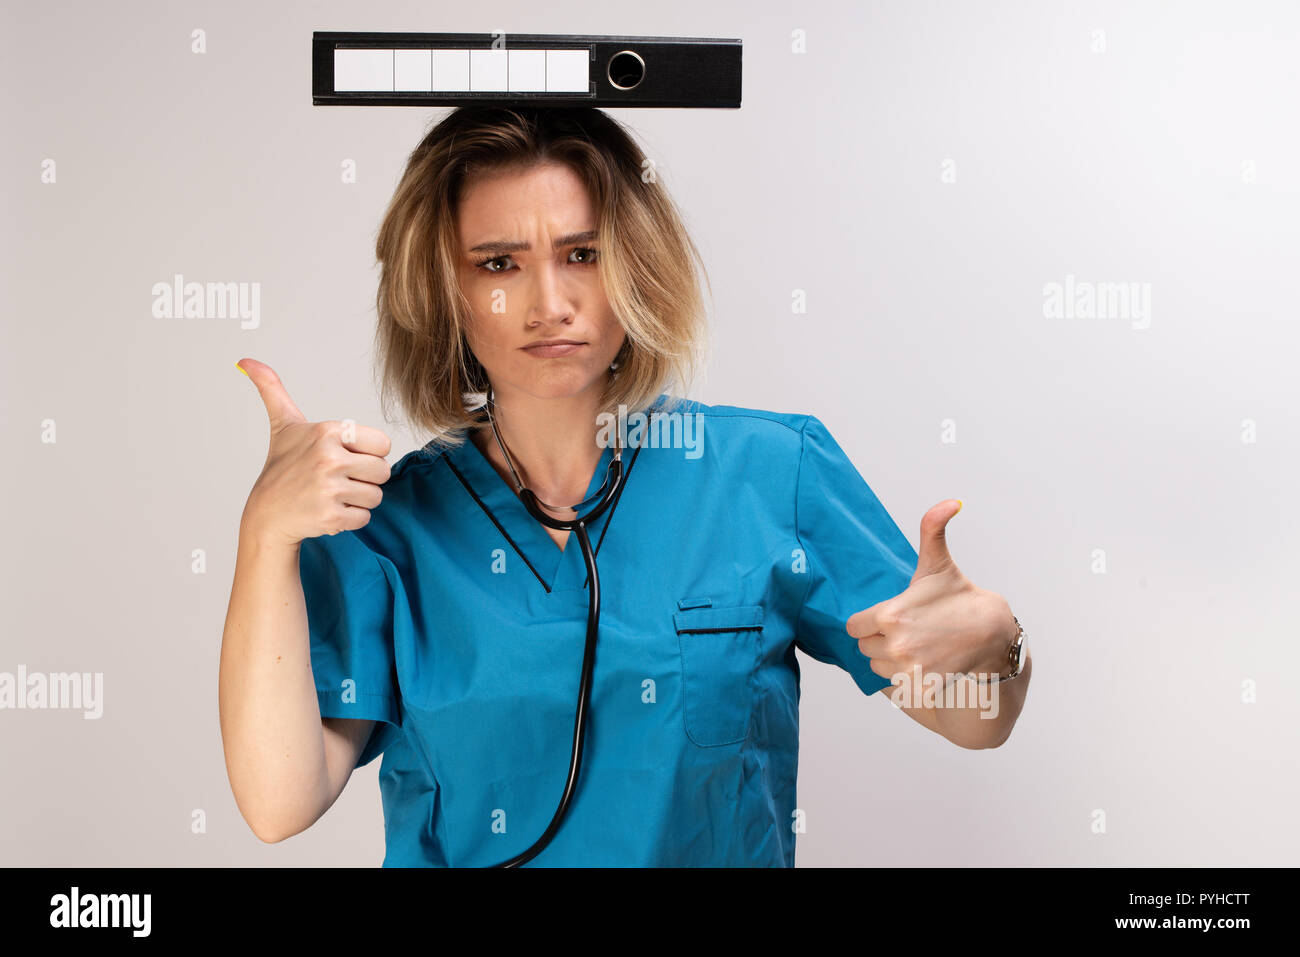 Crazy female doctor balancing documents on her head displaying thumbs up. Positive doctor attitude Stock Photo